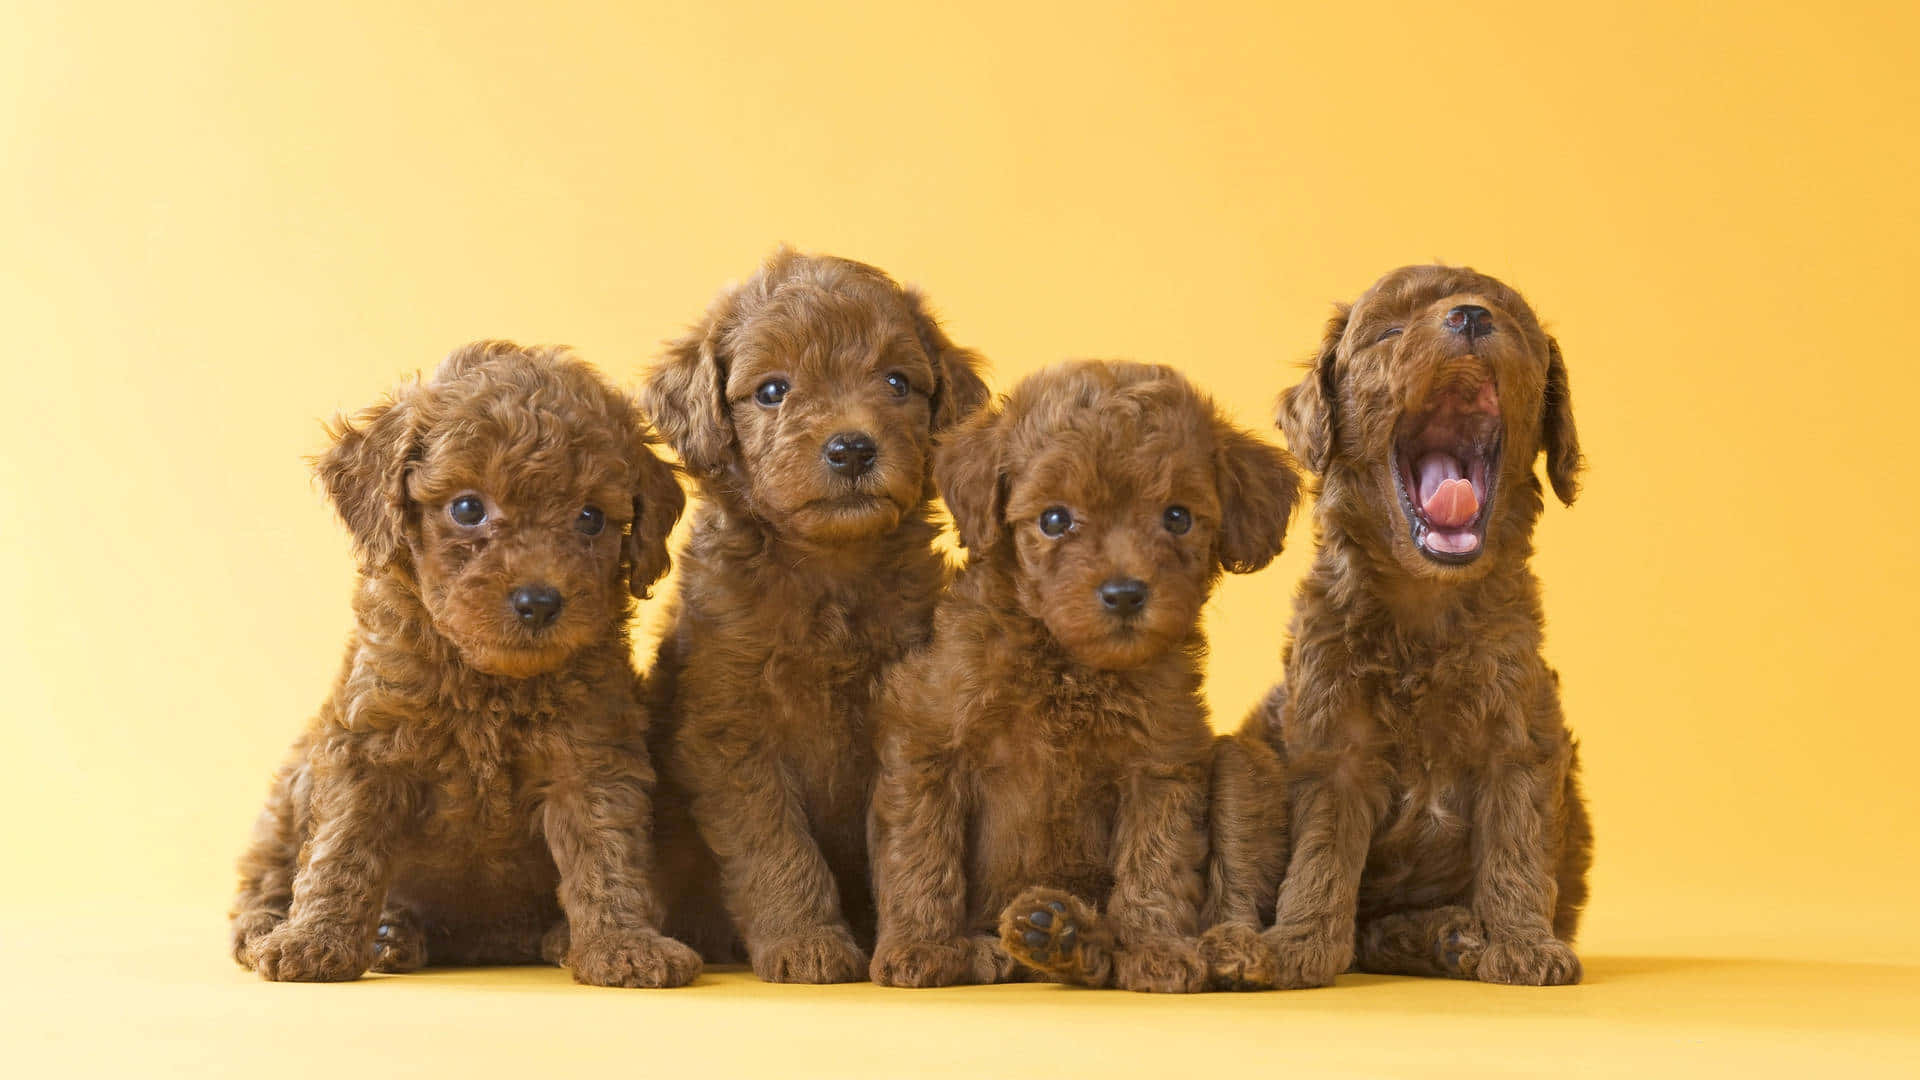 100+] Cute Dogs Background s | Wallpapers.com